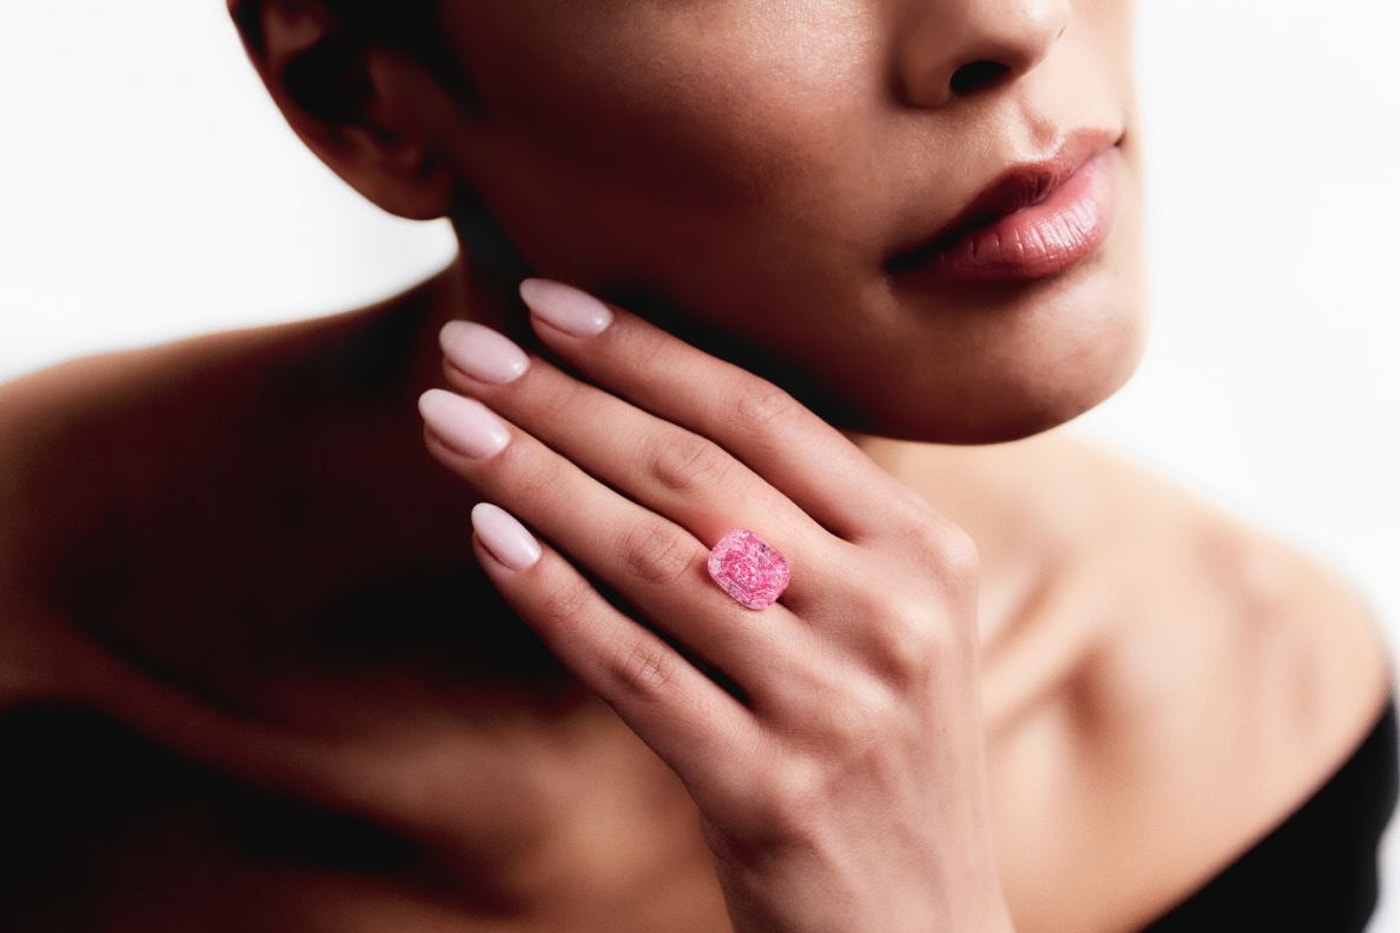 Ultra-Rare Pink Diamond Heads to Auction, Expected To Sell for Over $35 Million USD hong kong the eternal pink de beers jewelry gemstone rocks